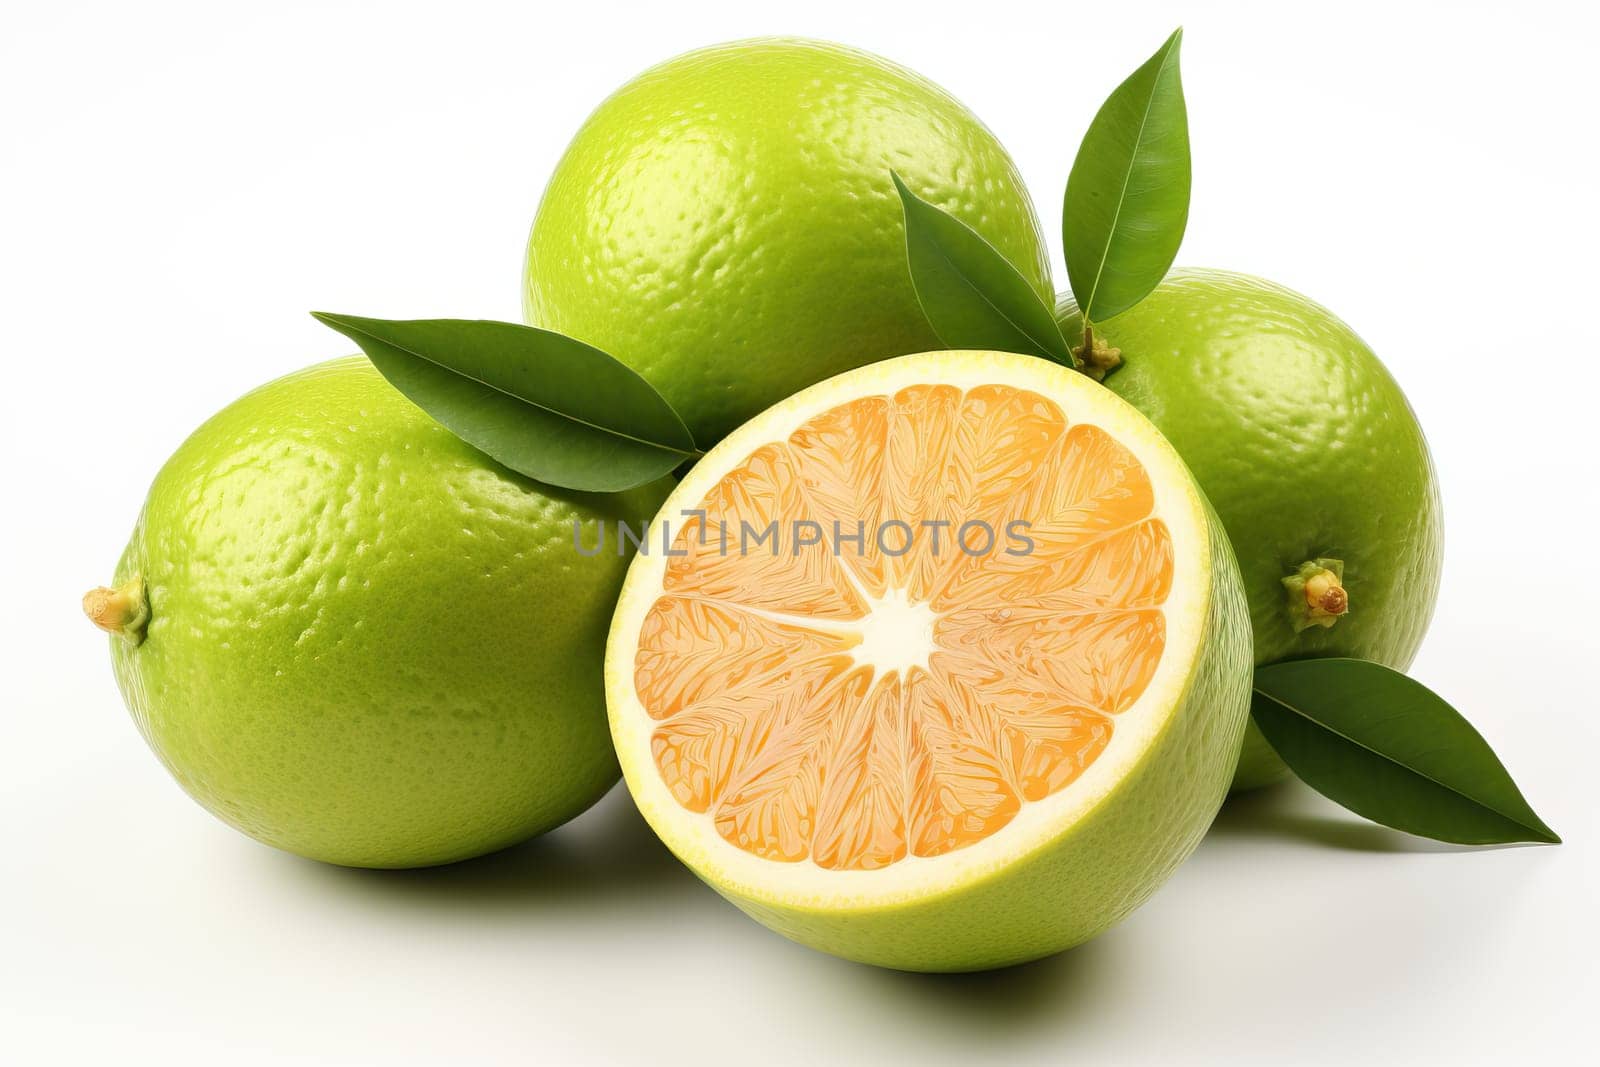 pomelo fruit isolated on white background close-up, pomelo is a type of citrus fruit.